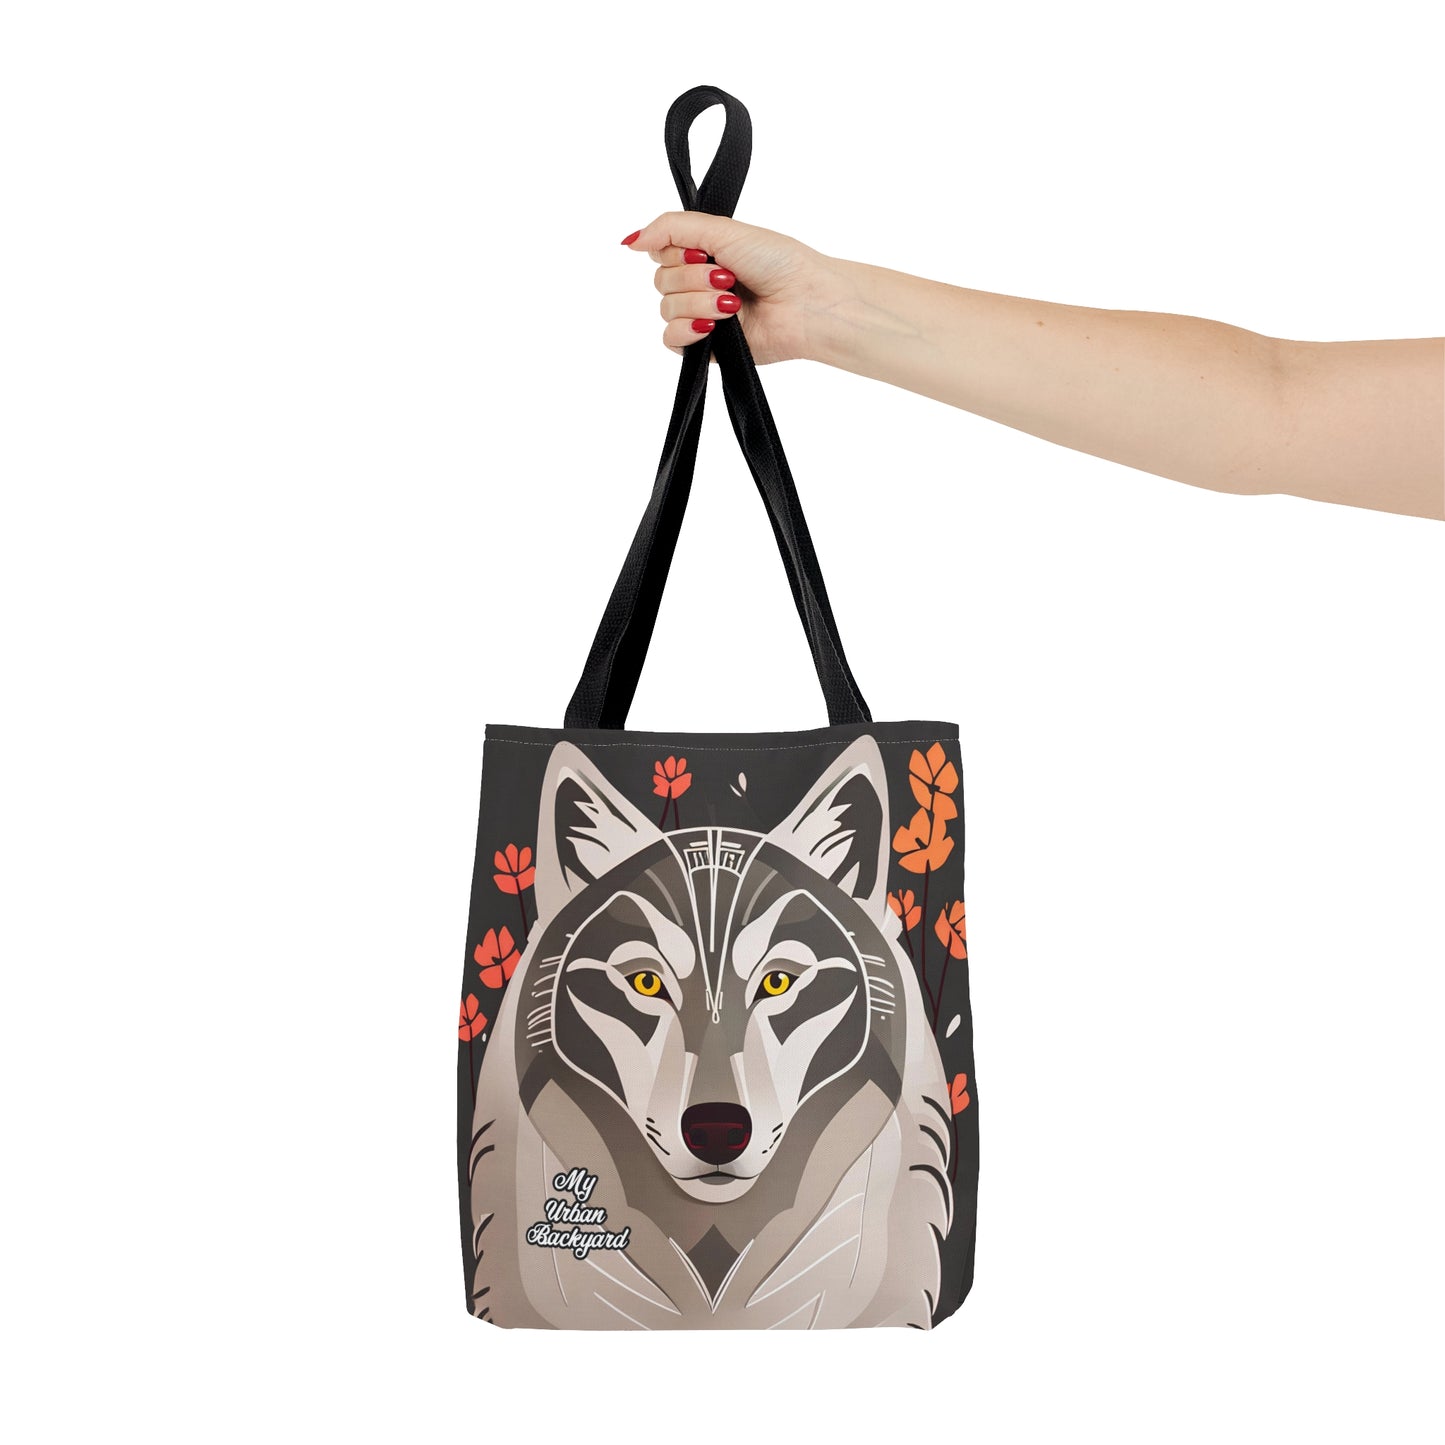 Art Deco Wolf, Tote Bag for Everyday Use - Durable and Functional